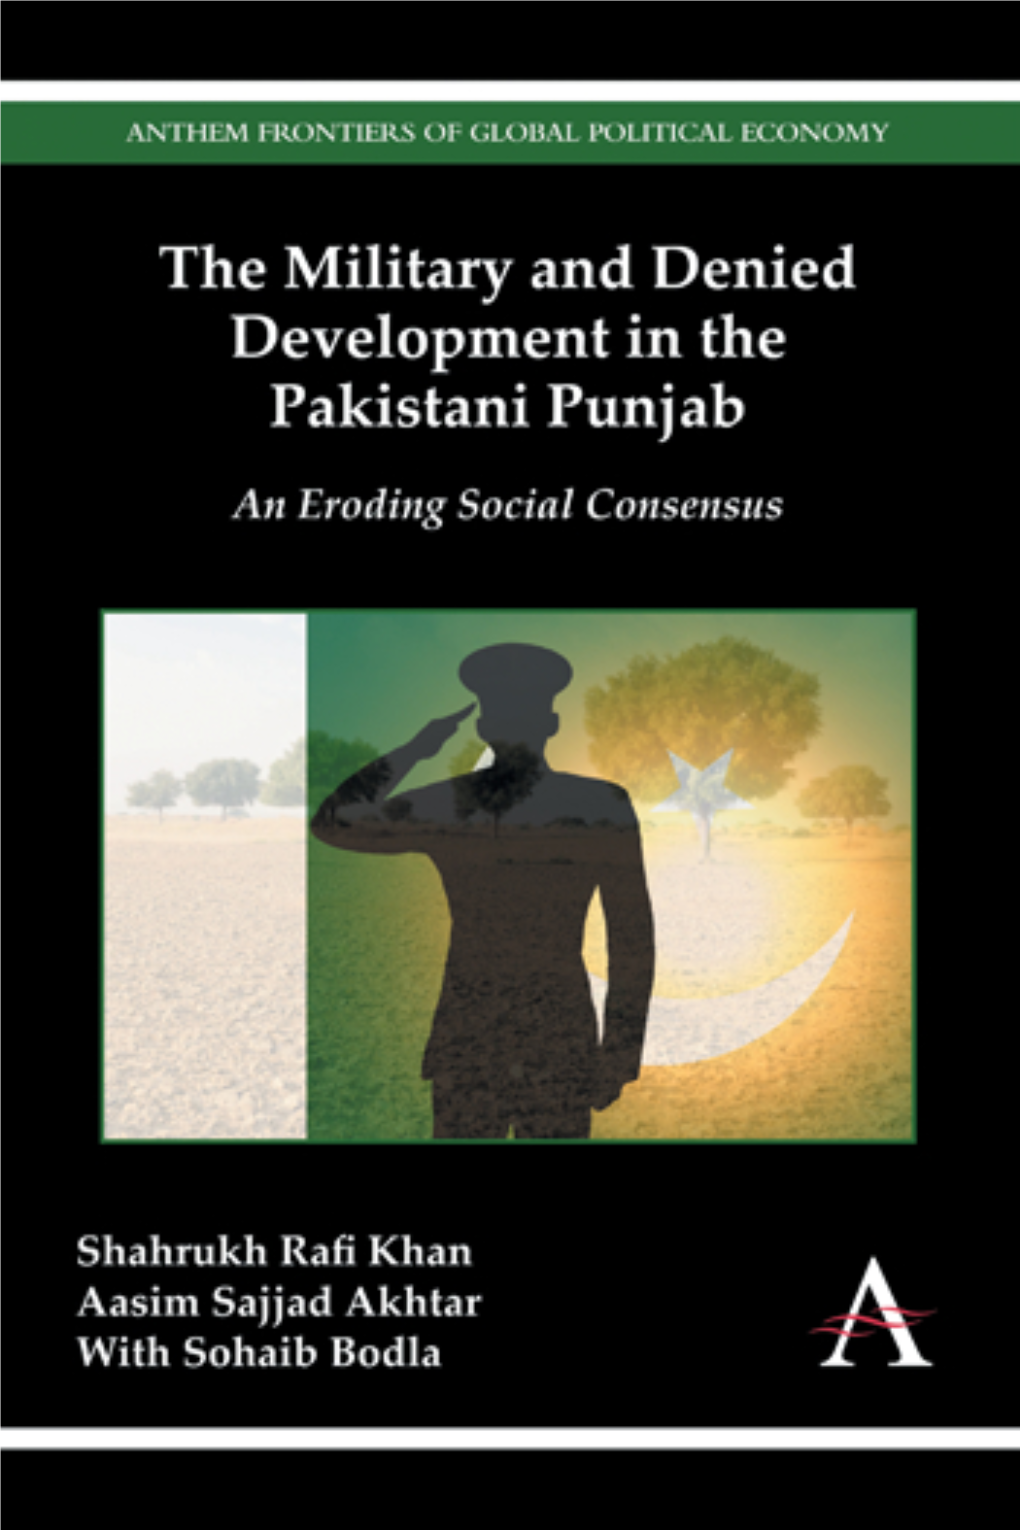 The Military and Denied Development in the Pakistani Punjab Anthem Frontiers of Global Political Economy